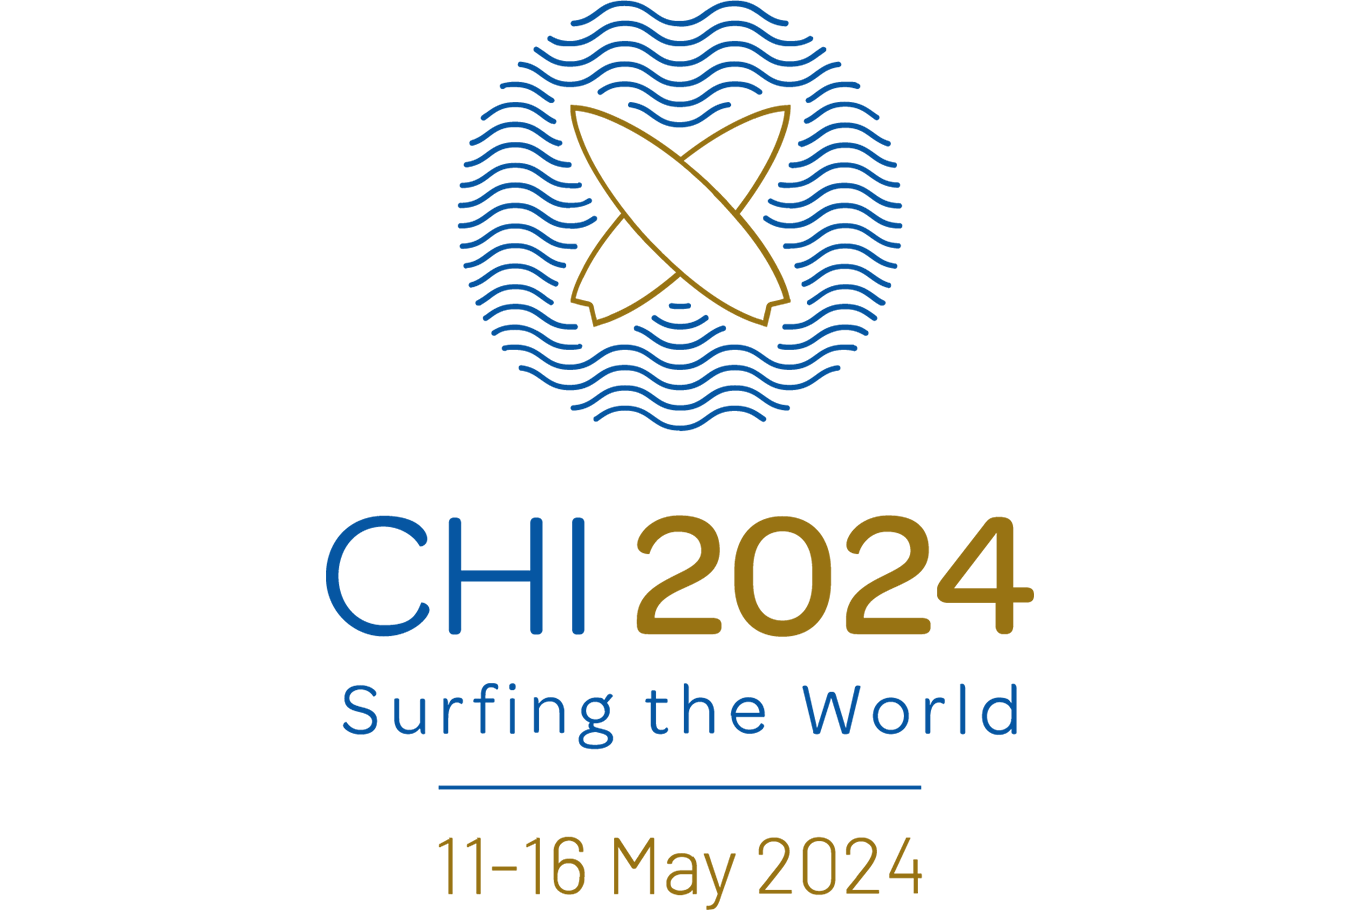 CHI 2024, Surfing the World, 11-16 May 2024